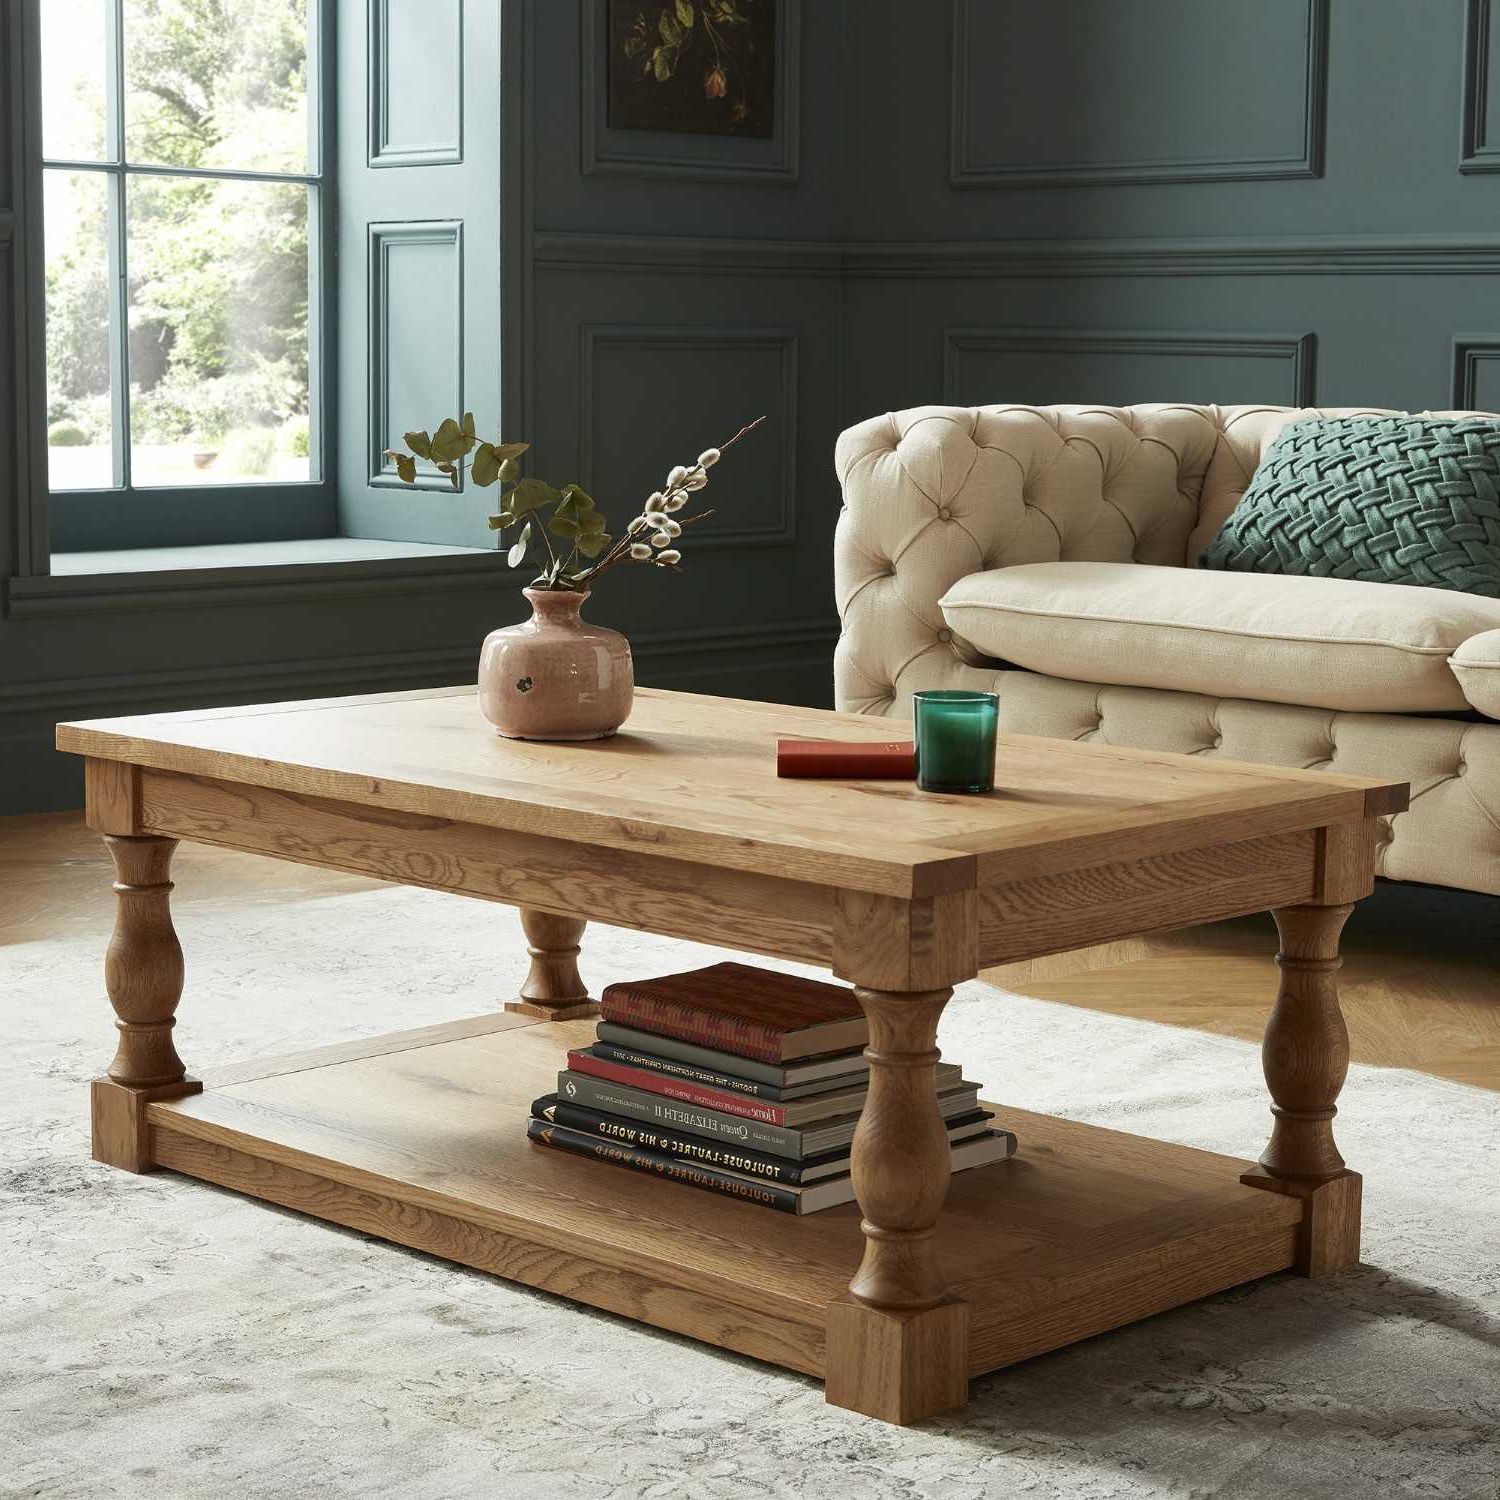 Pemberly Row Replicated Wood Coffee Tables Within Well Liked Westbury Rustic Style Oak Wood Rectangular Living Room Coffee Table (View 15 of 15)